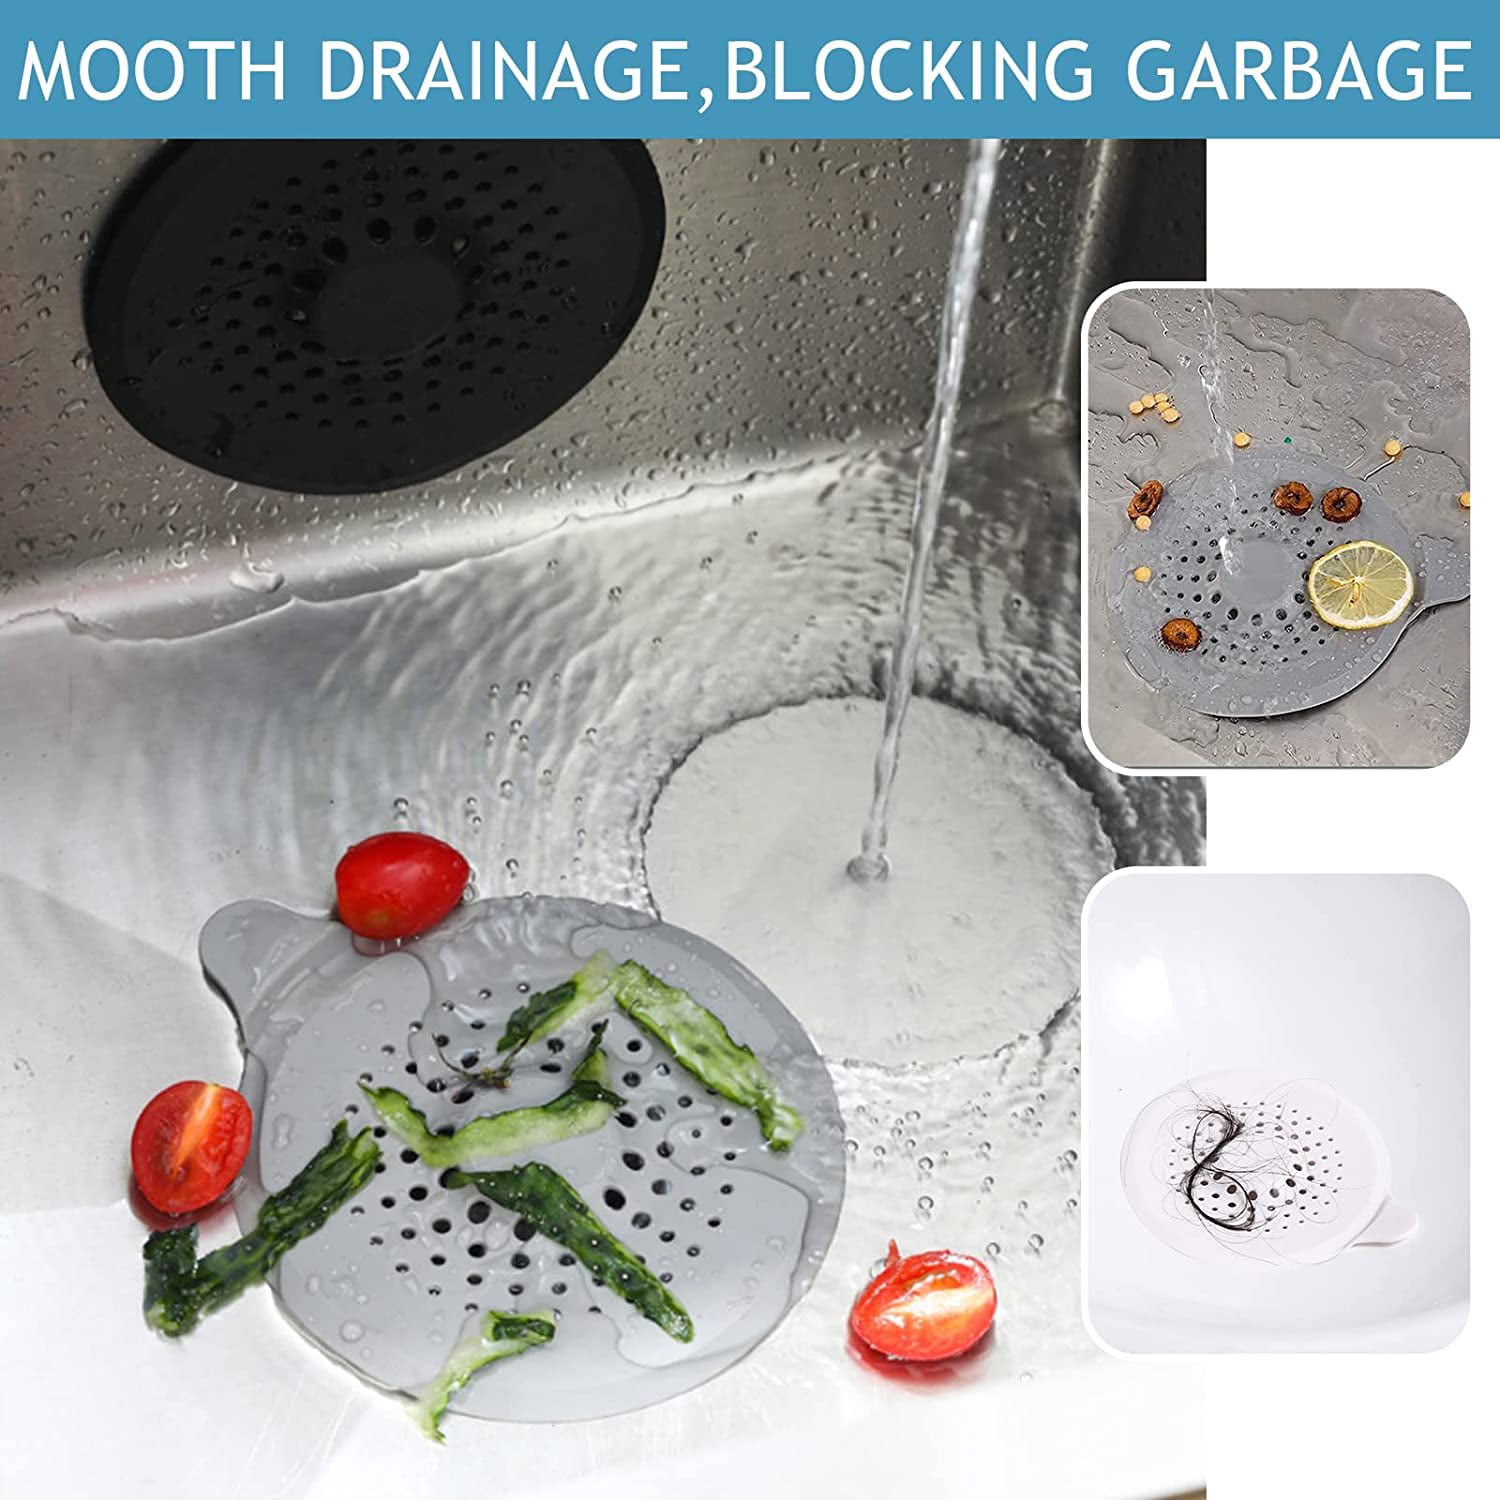 Drain Hair Catcher - Drain Covers for Shower to Catch Hair - Silicone Suction Cup Drain Cover Without Blocking Drainage for Bathroom Shower Floor